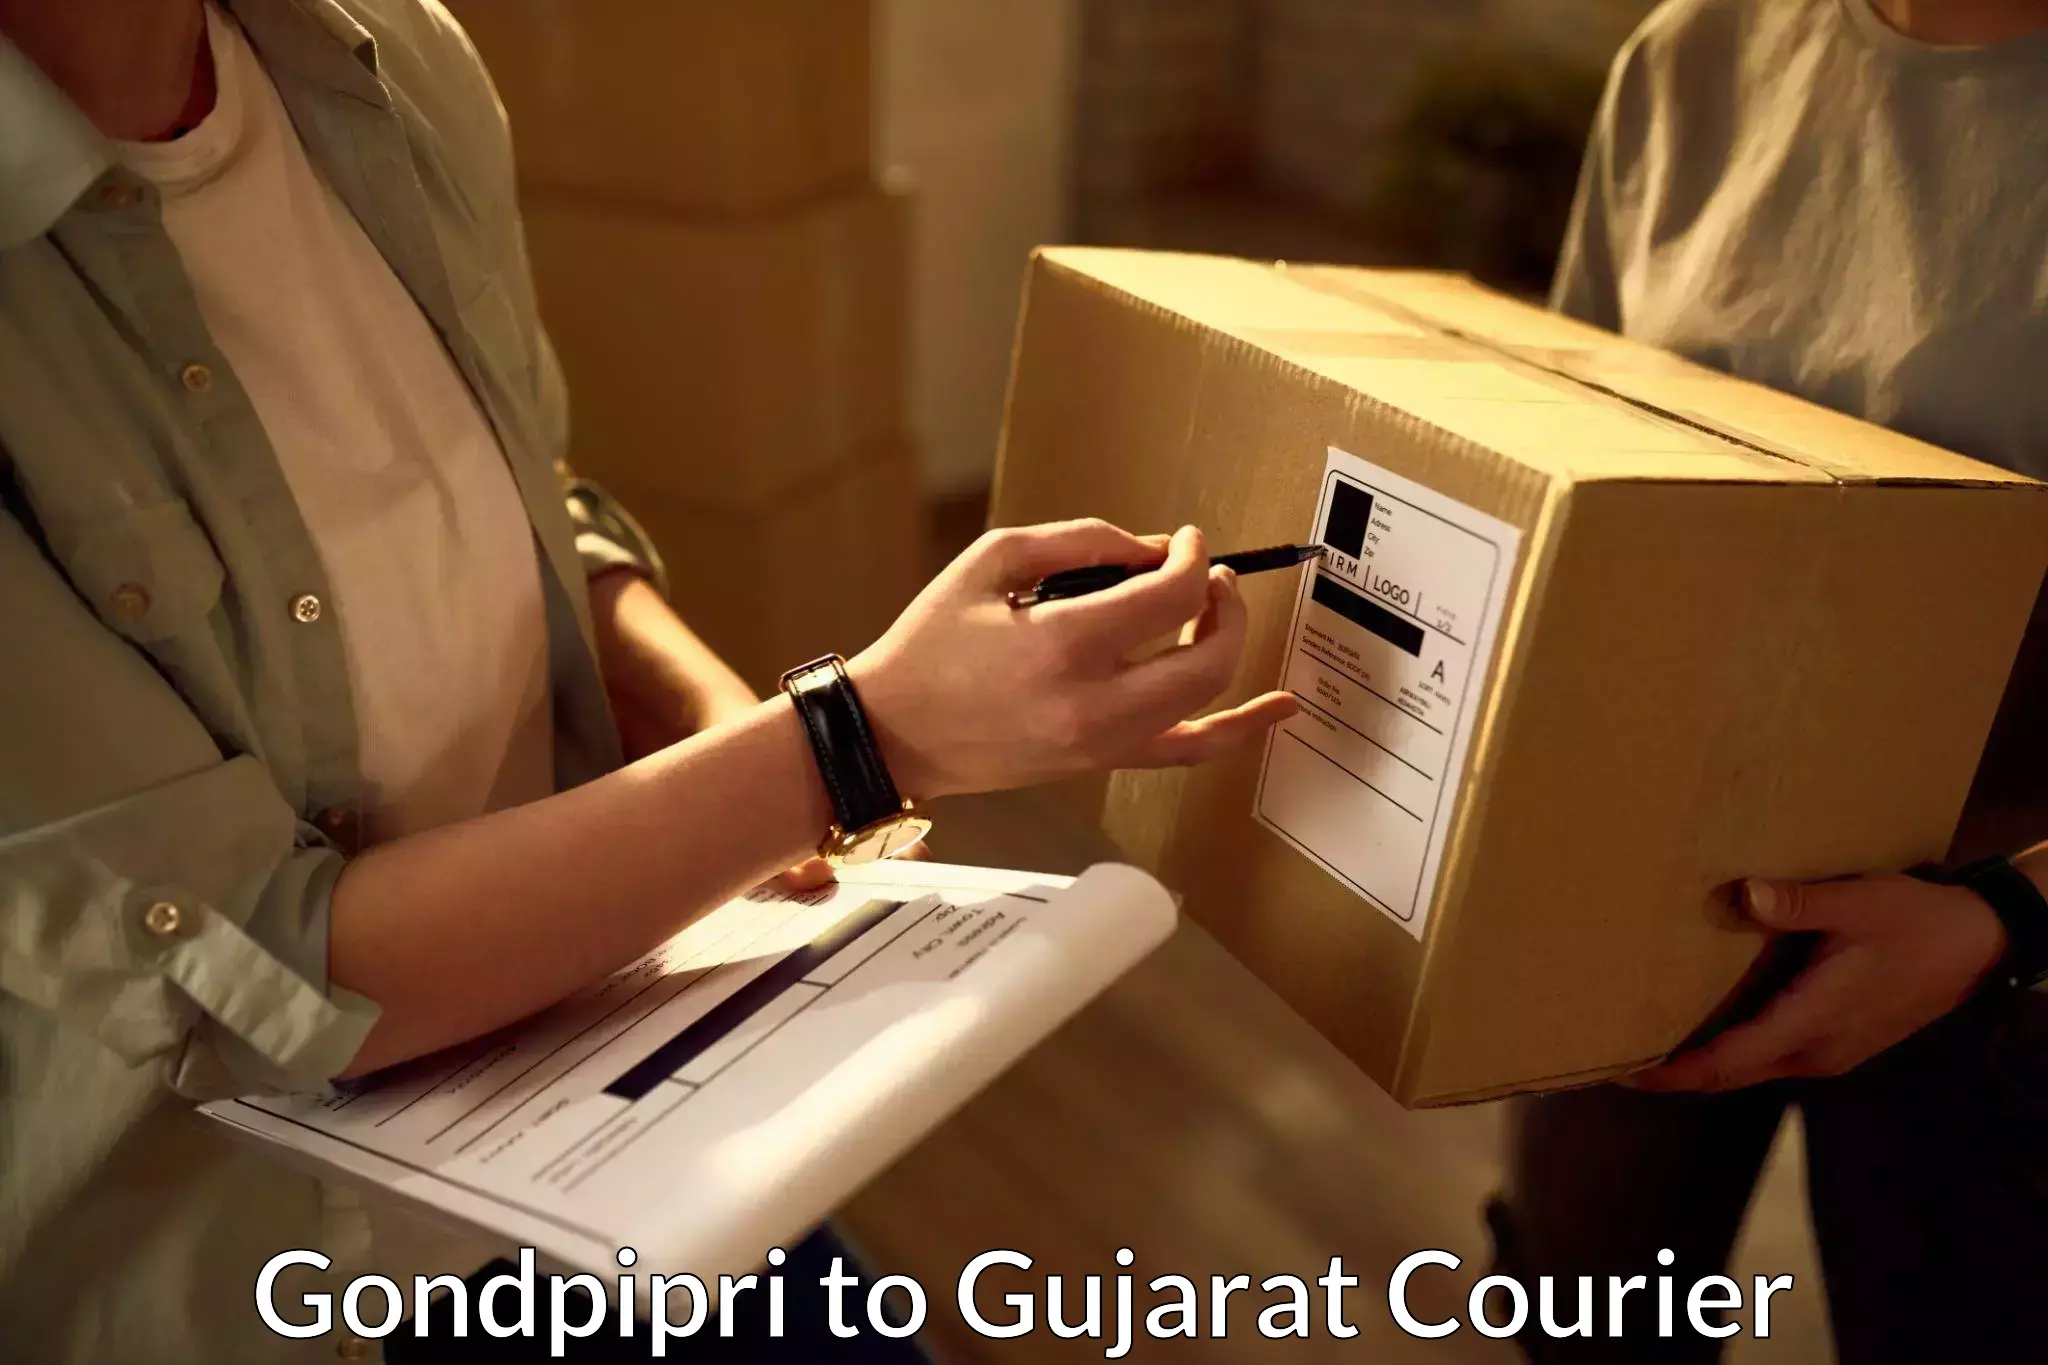 Personal courier services in Gondpipri to Kachchh